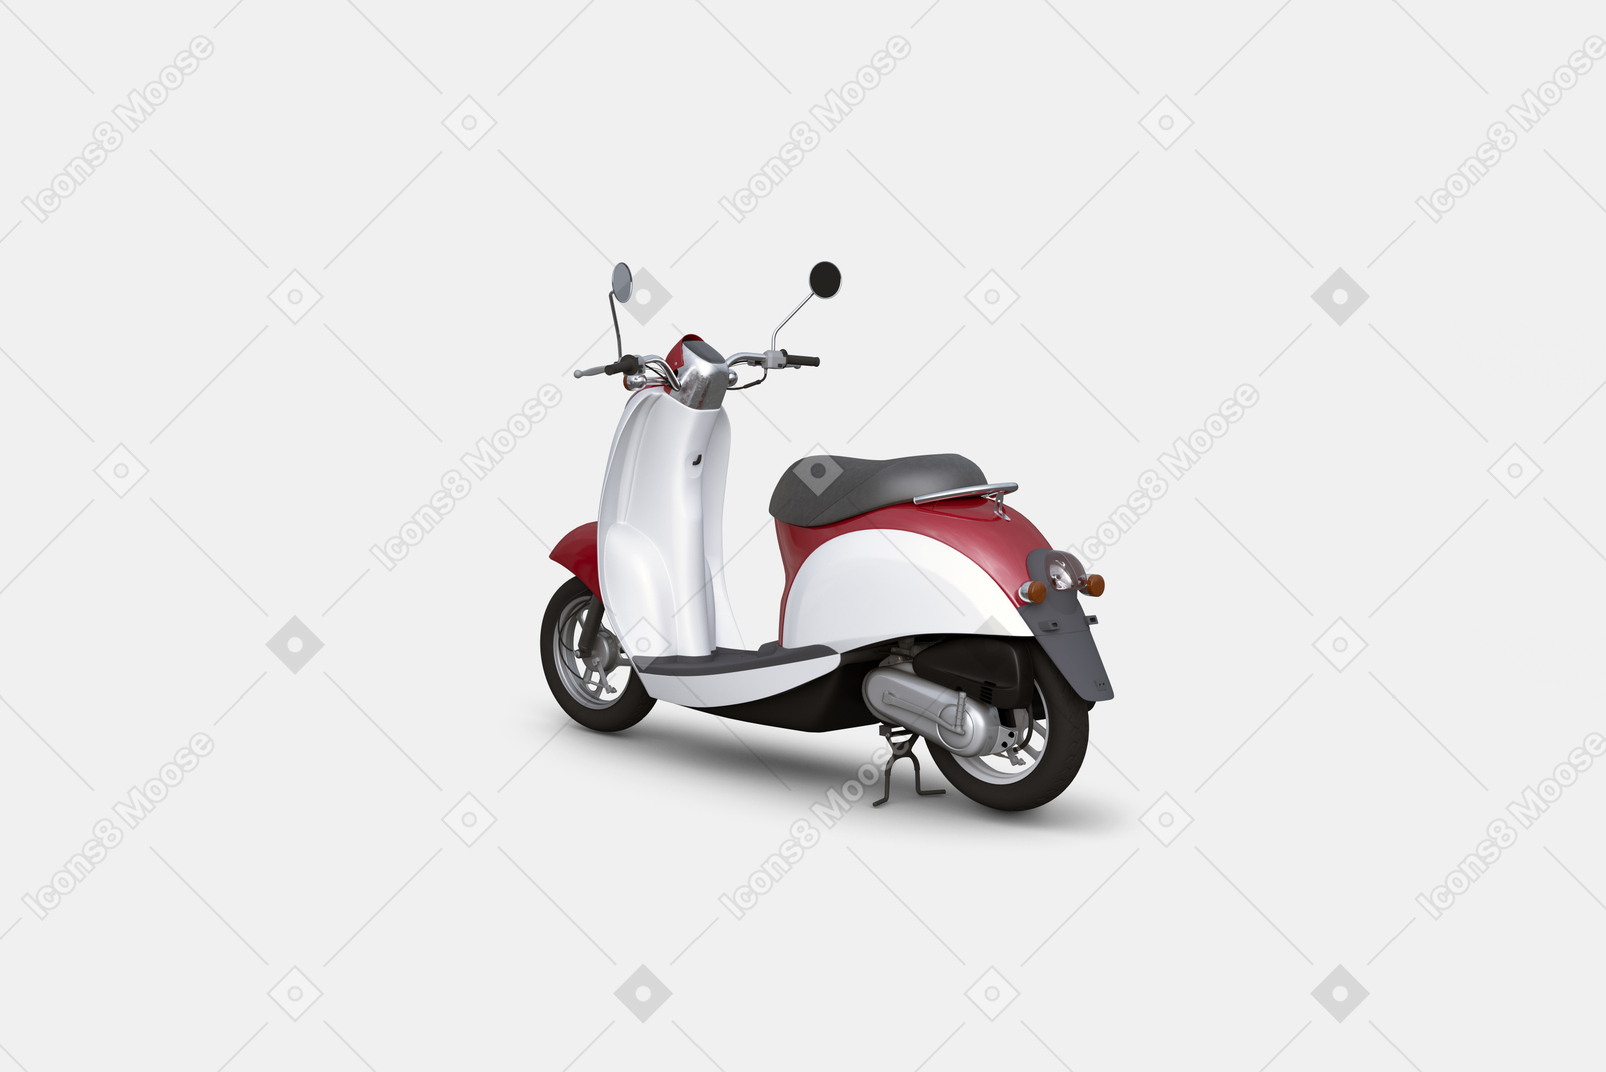 Scooter rosso